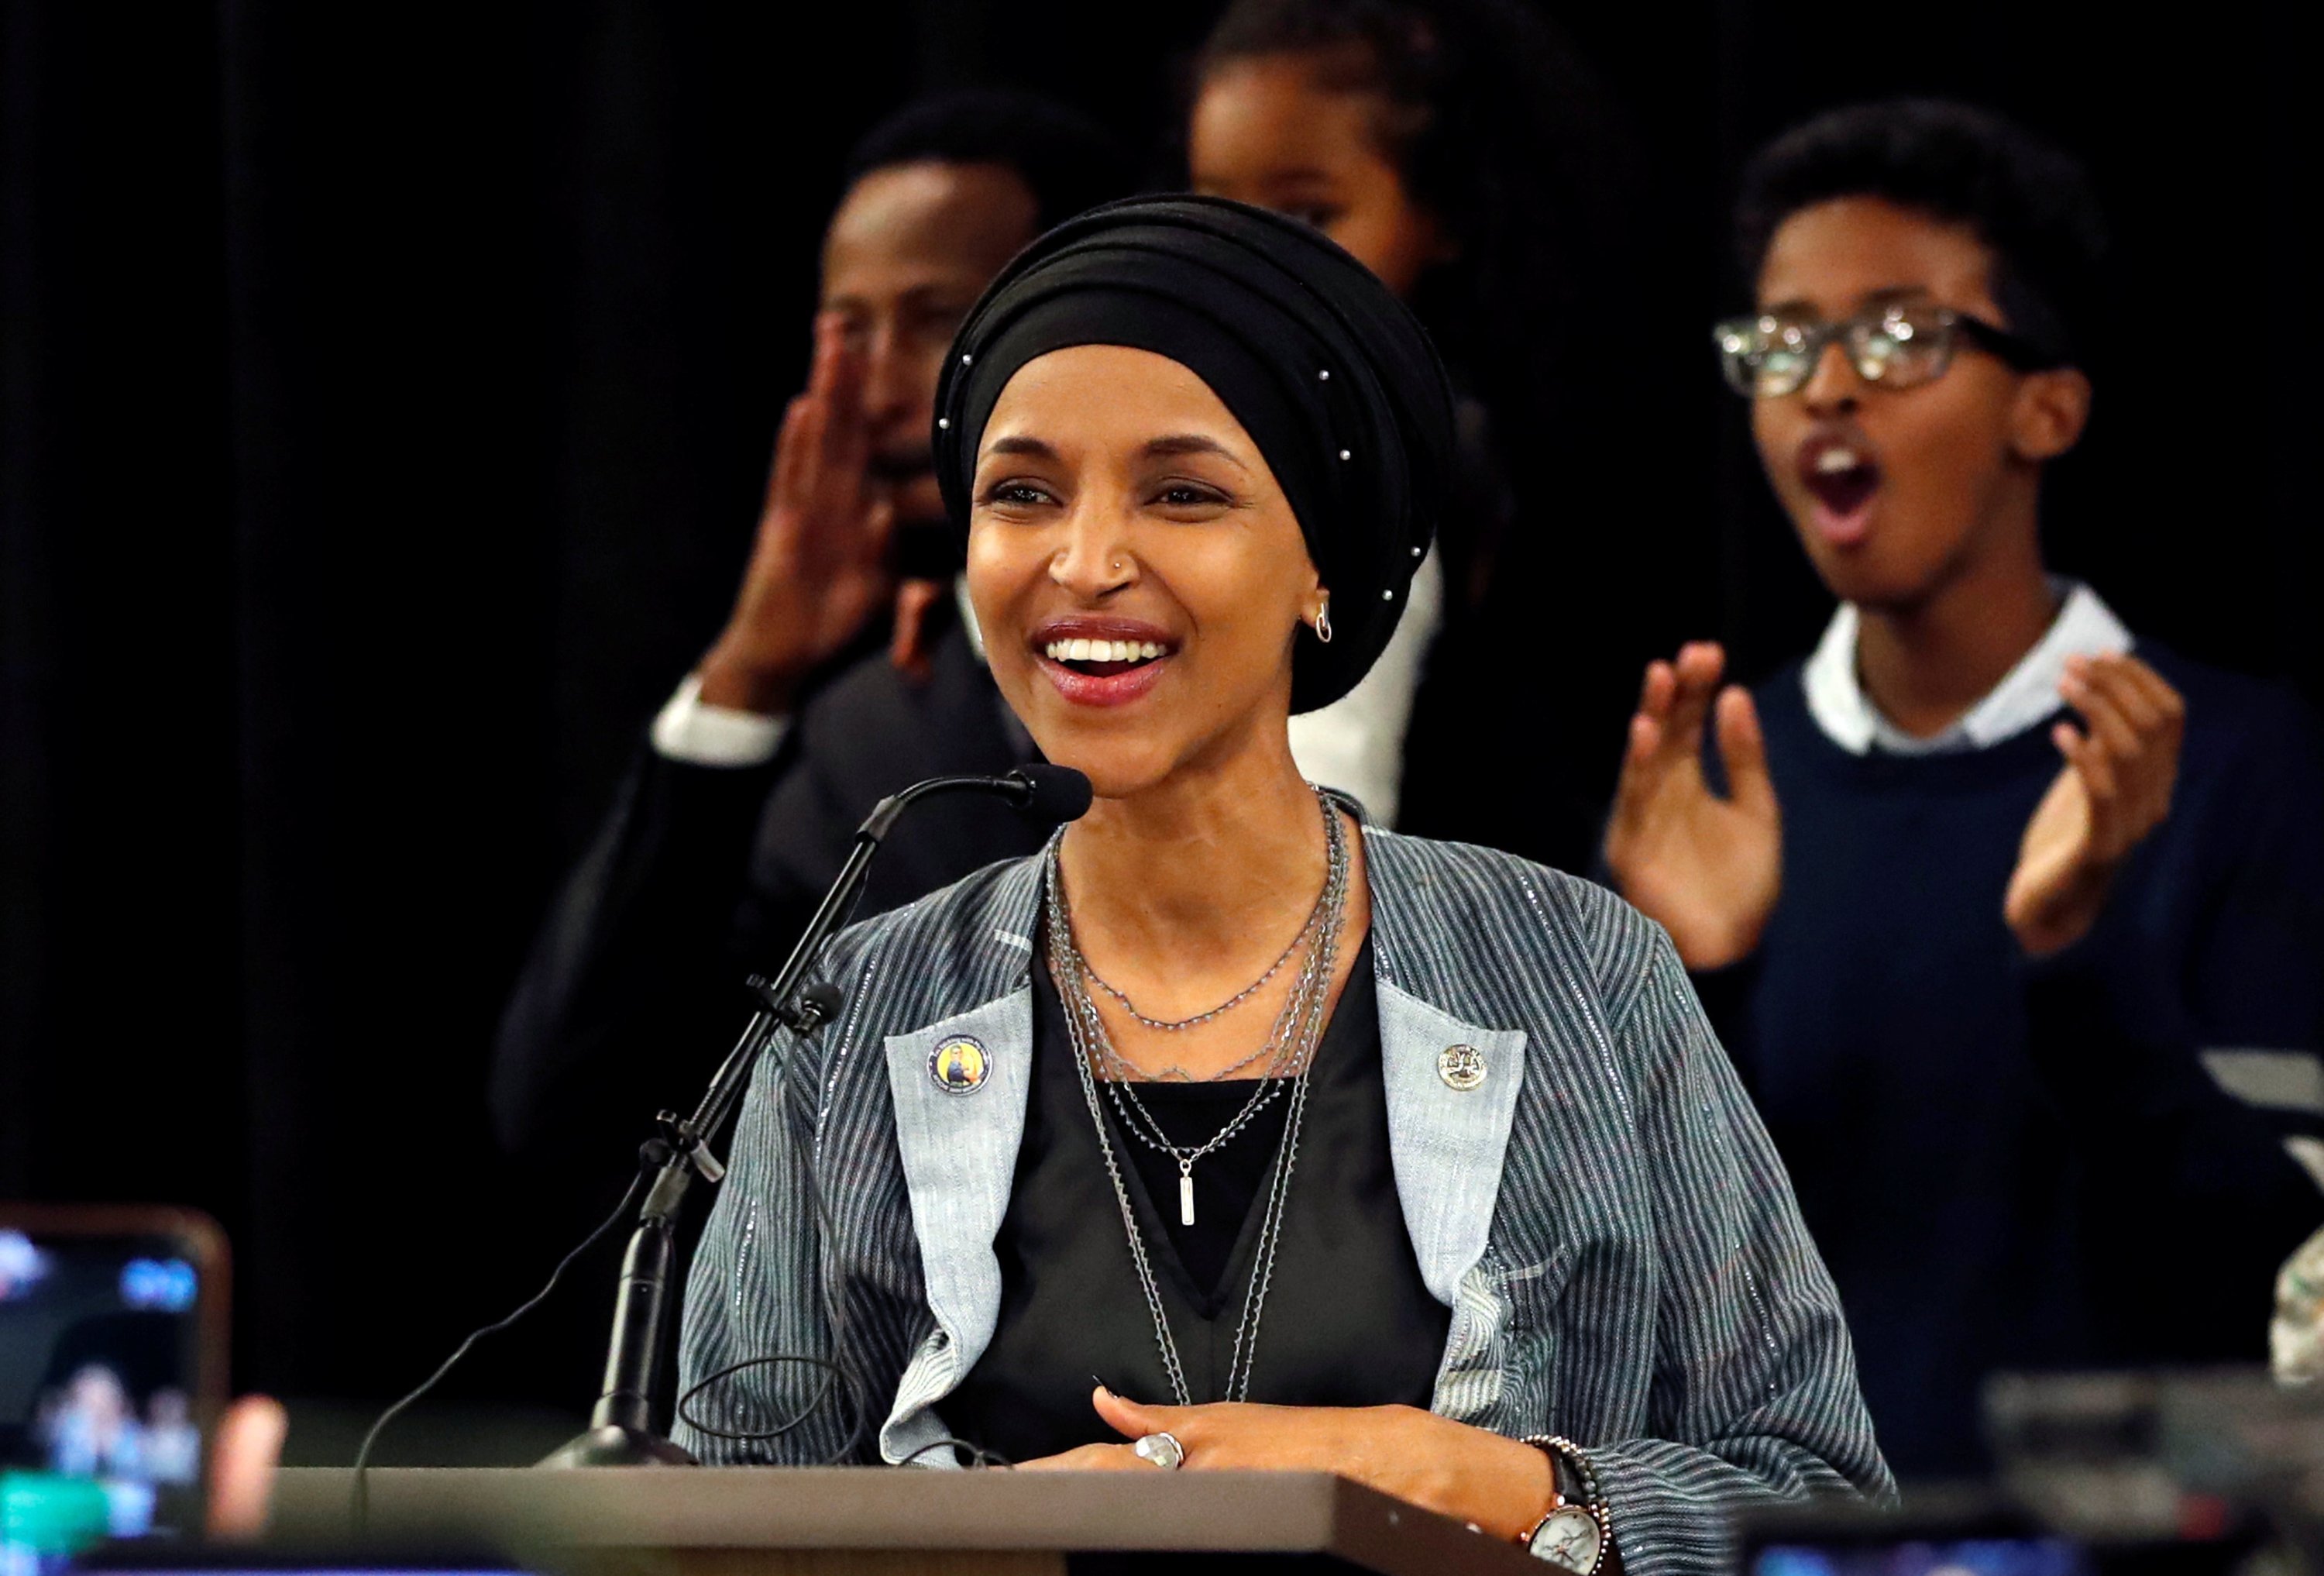 Democratic congressional candidate Ilhan Omar reacts after appearing at her election night party in Minneapolis, Minnesota, U.S, Nov.6, 2018. (REUTERS)